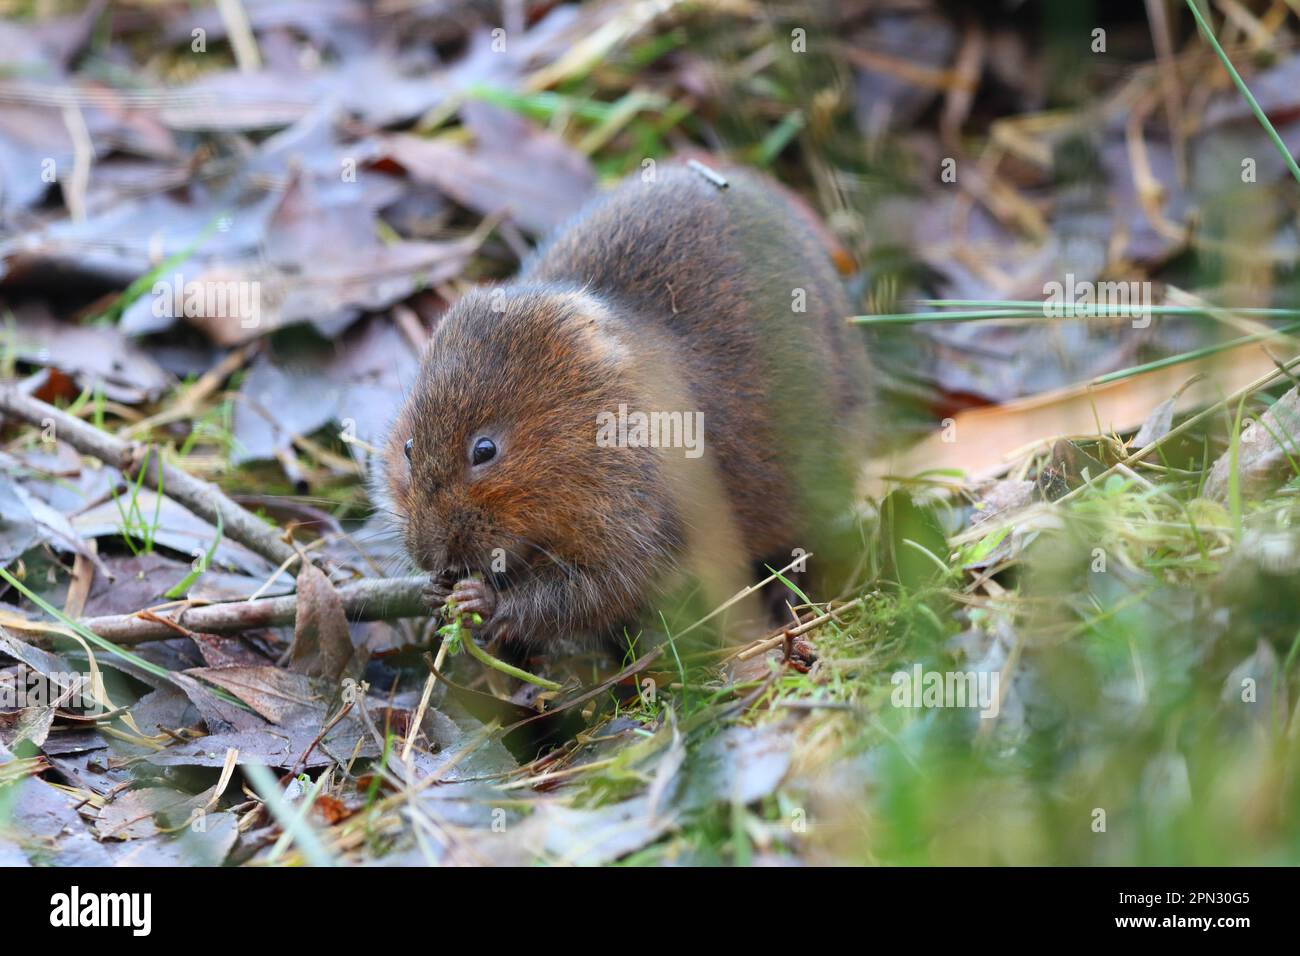 Close up image of a Water Vole in a natural environment. Middlesbrough, England, UK. Stock Photo